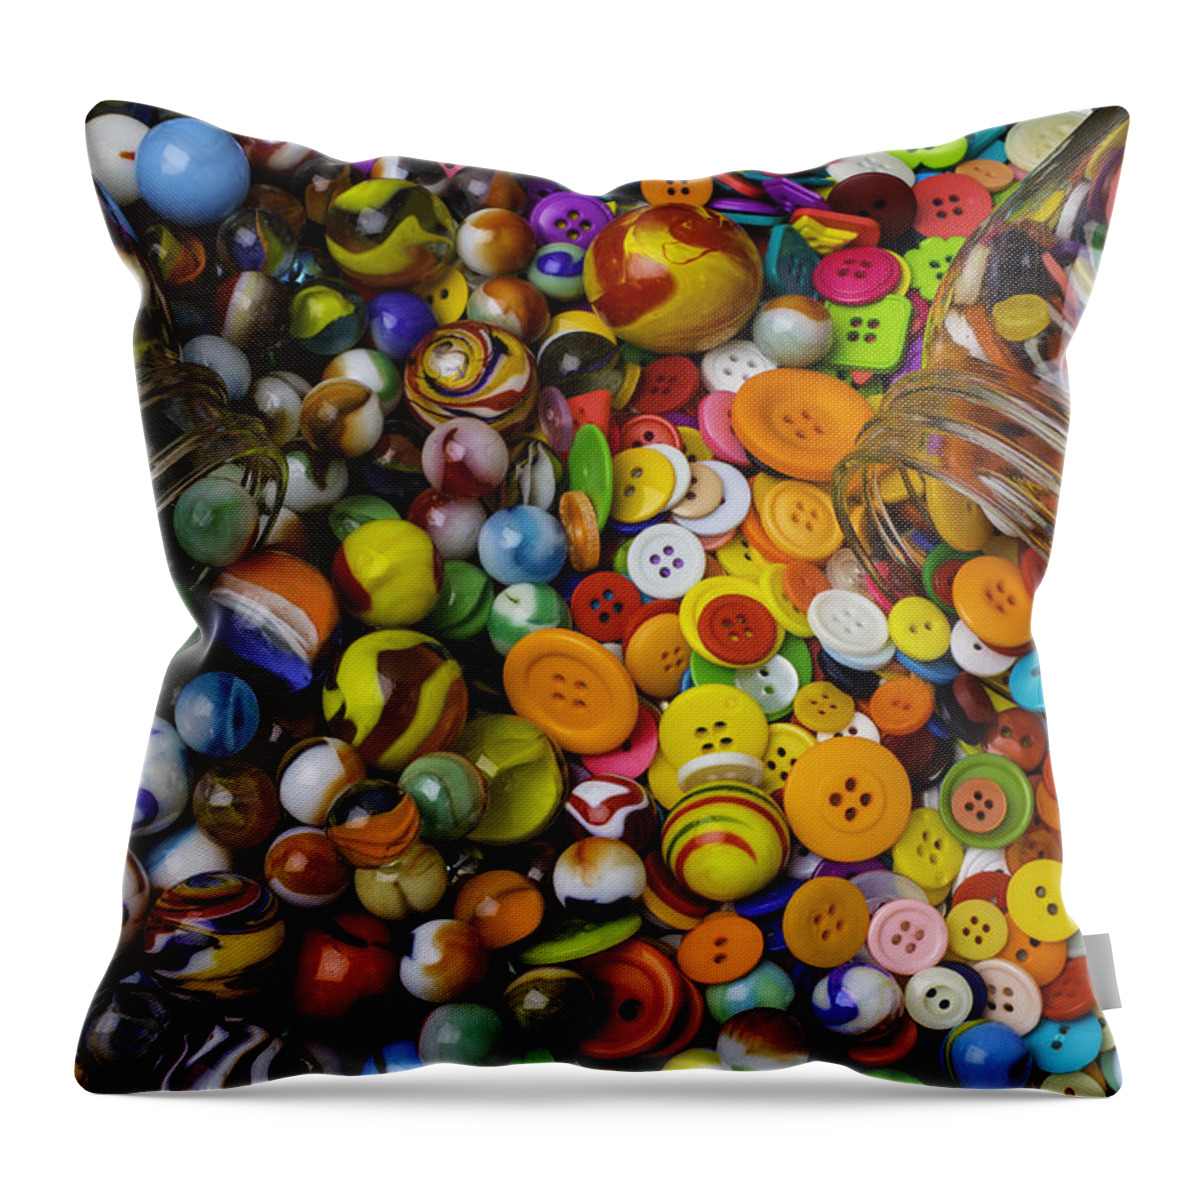 Two Throw Pillow featuring the photograph Buttons And Marbles by Garry Gay